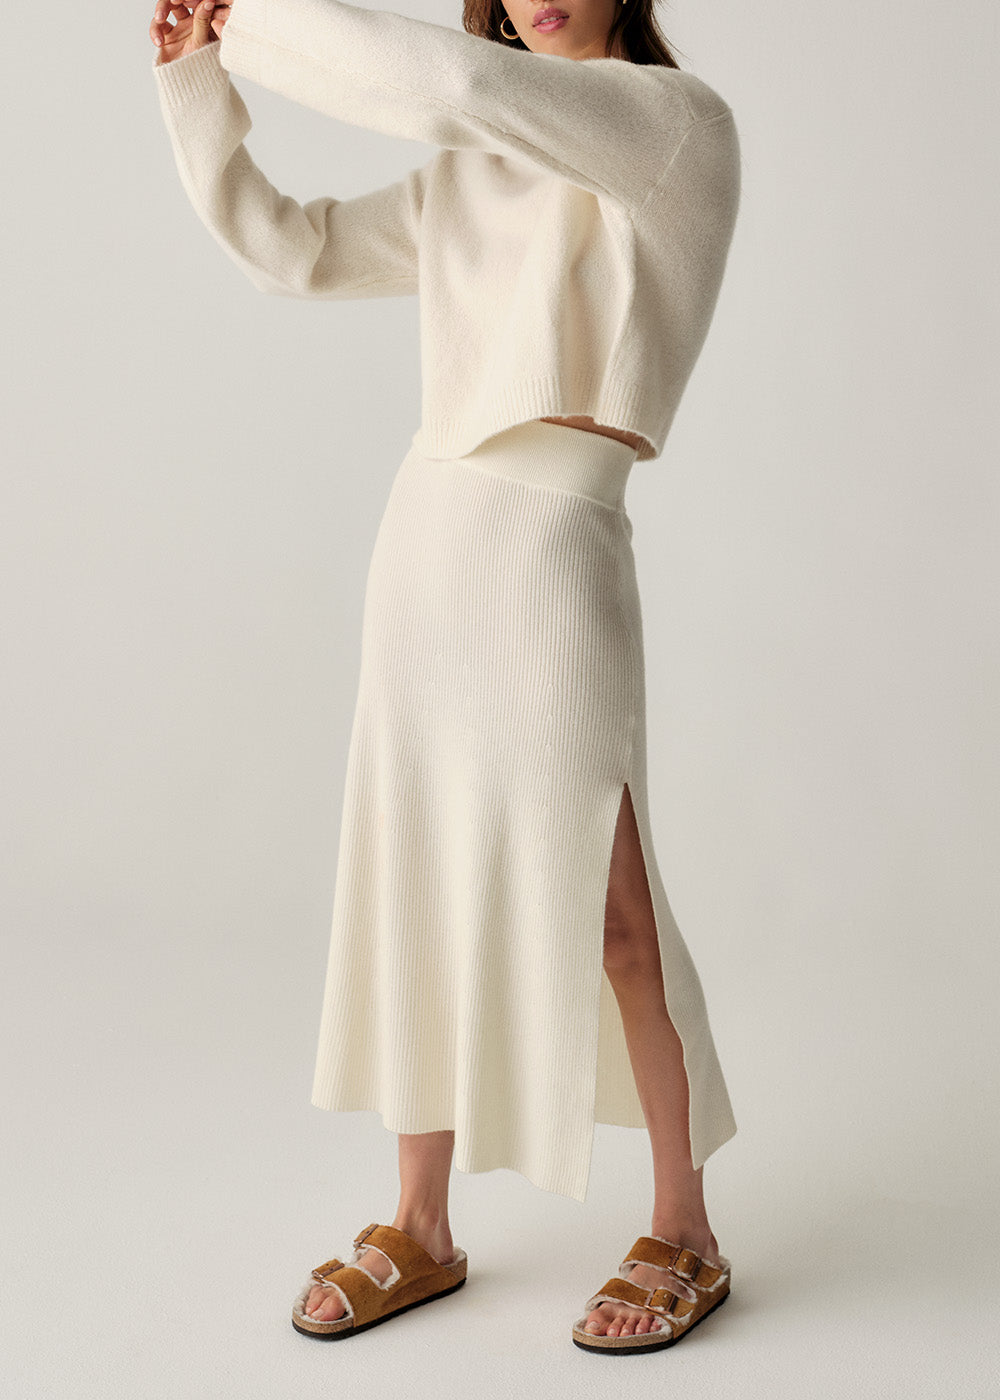 River Knit Skirt - Small / Ivory